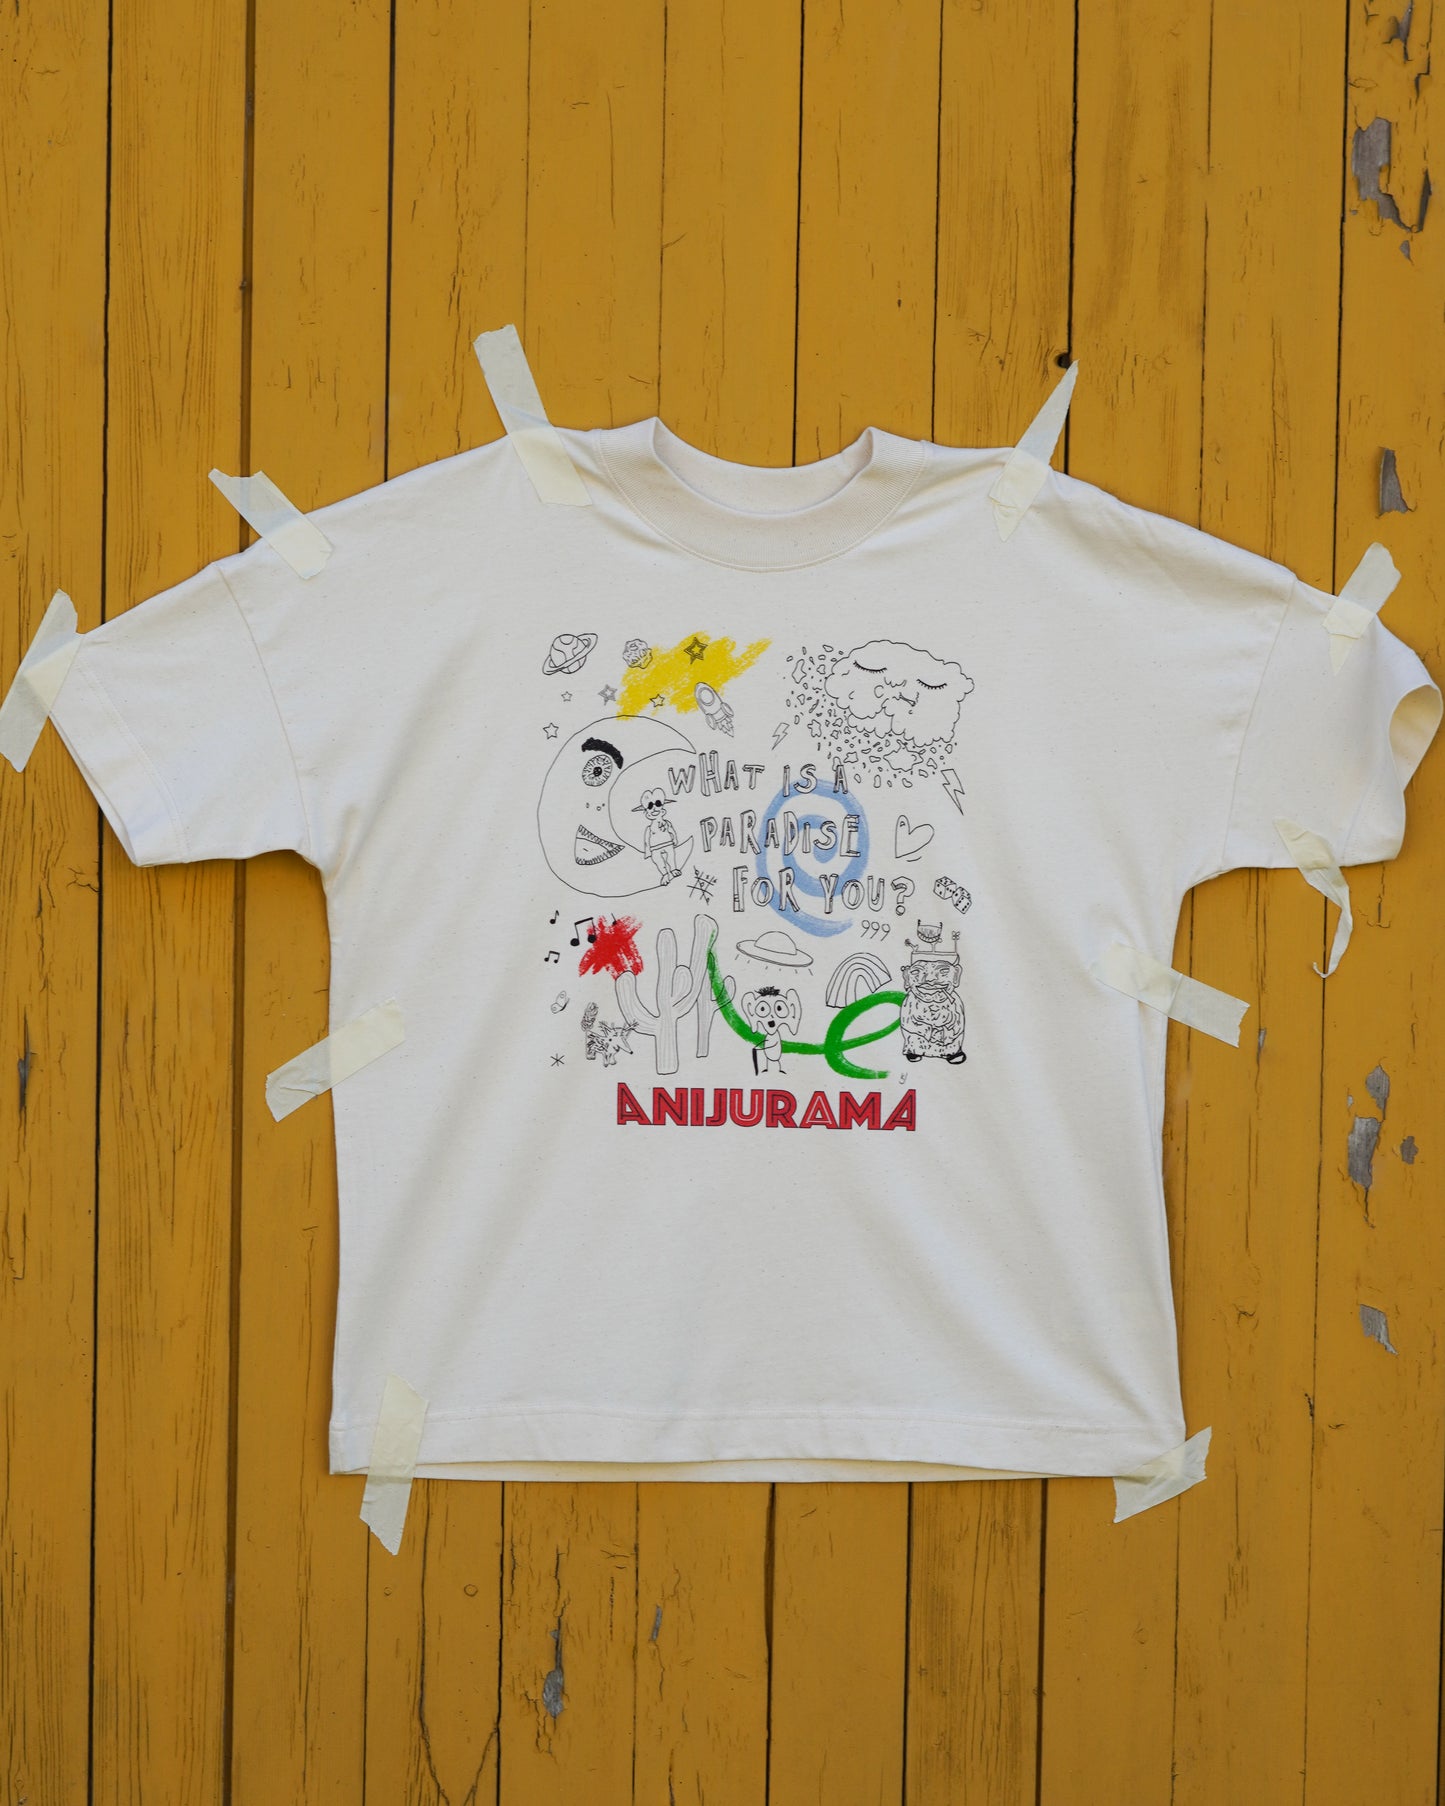 ANIJURAMA T-Shirt What is a paradise for you?